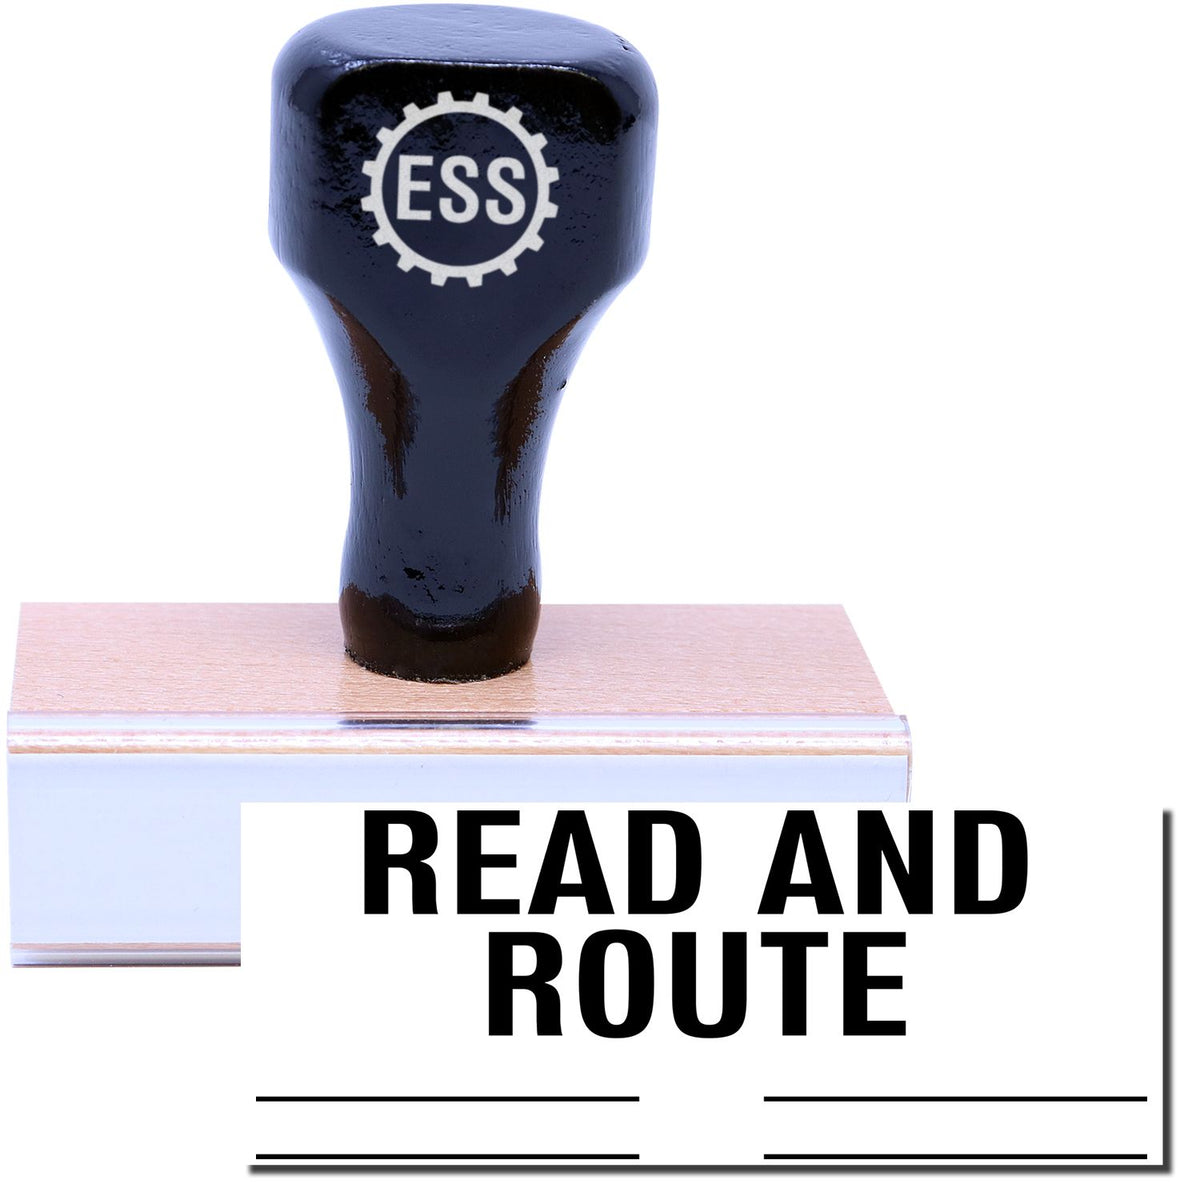 A stock office rubber stamp with a stamped image showing how the text &quot;READ AND ROUTE&quot; in a large font with lines underneath the text is displayed after stamping.